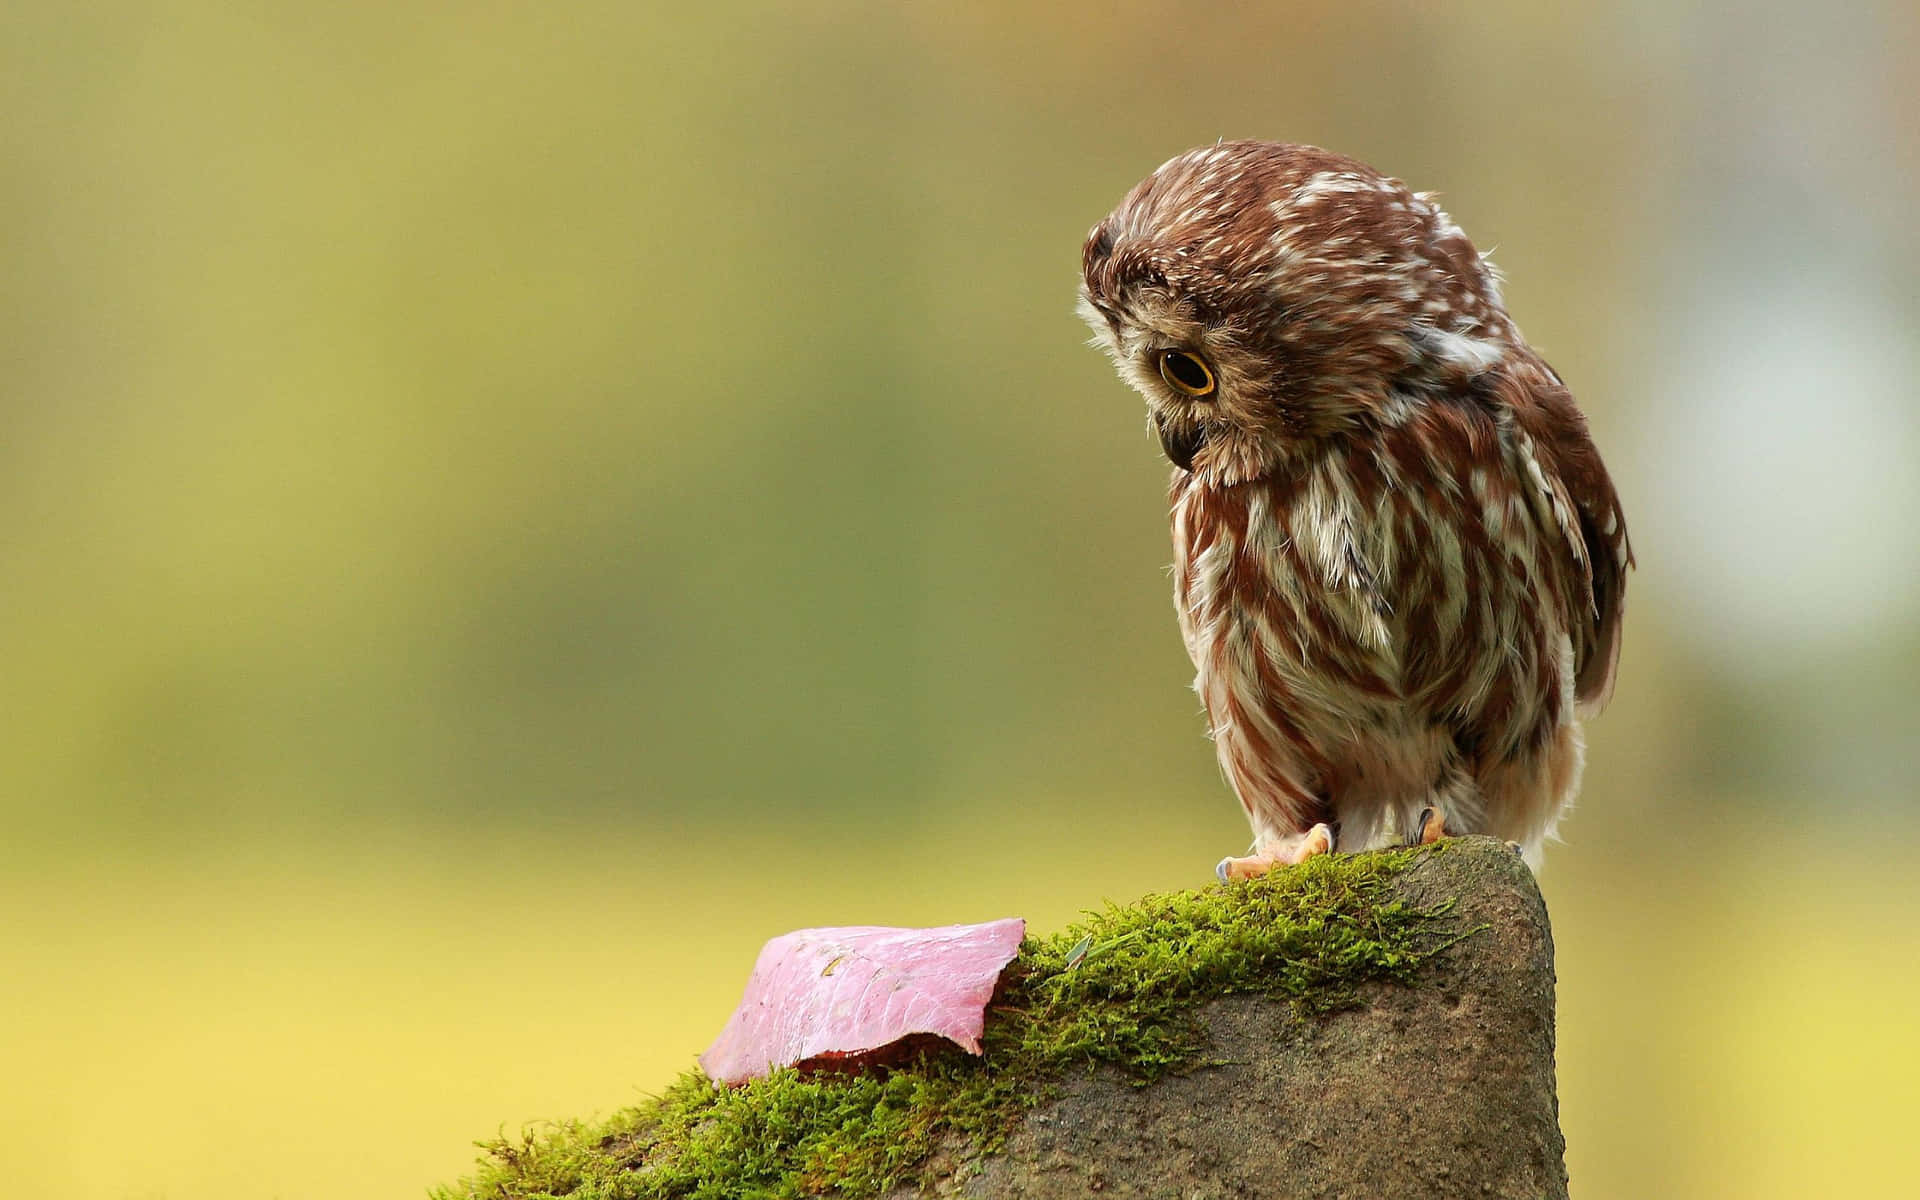 A Small Owl Sitting On A Rock